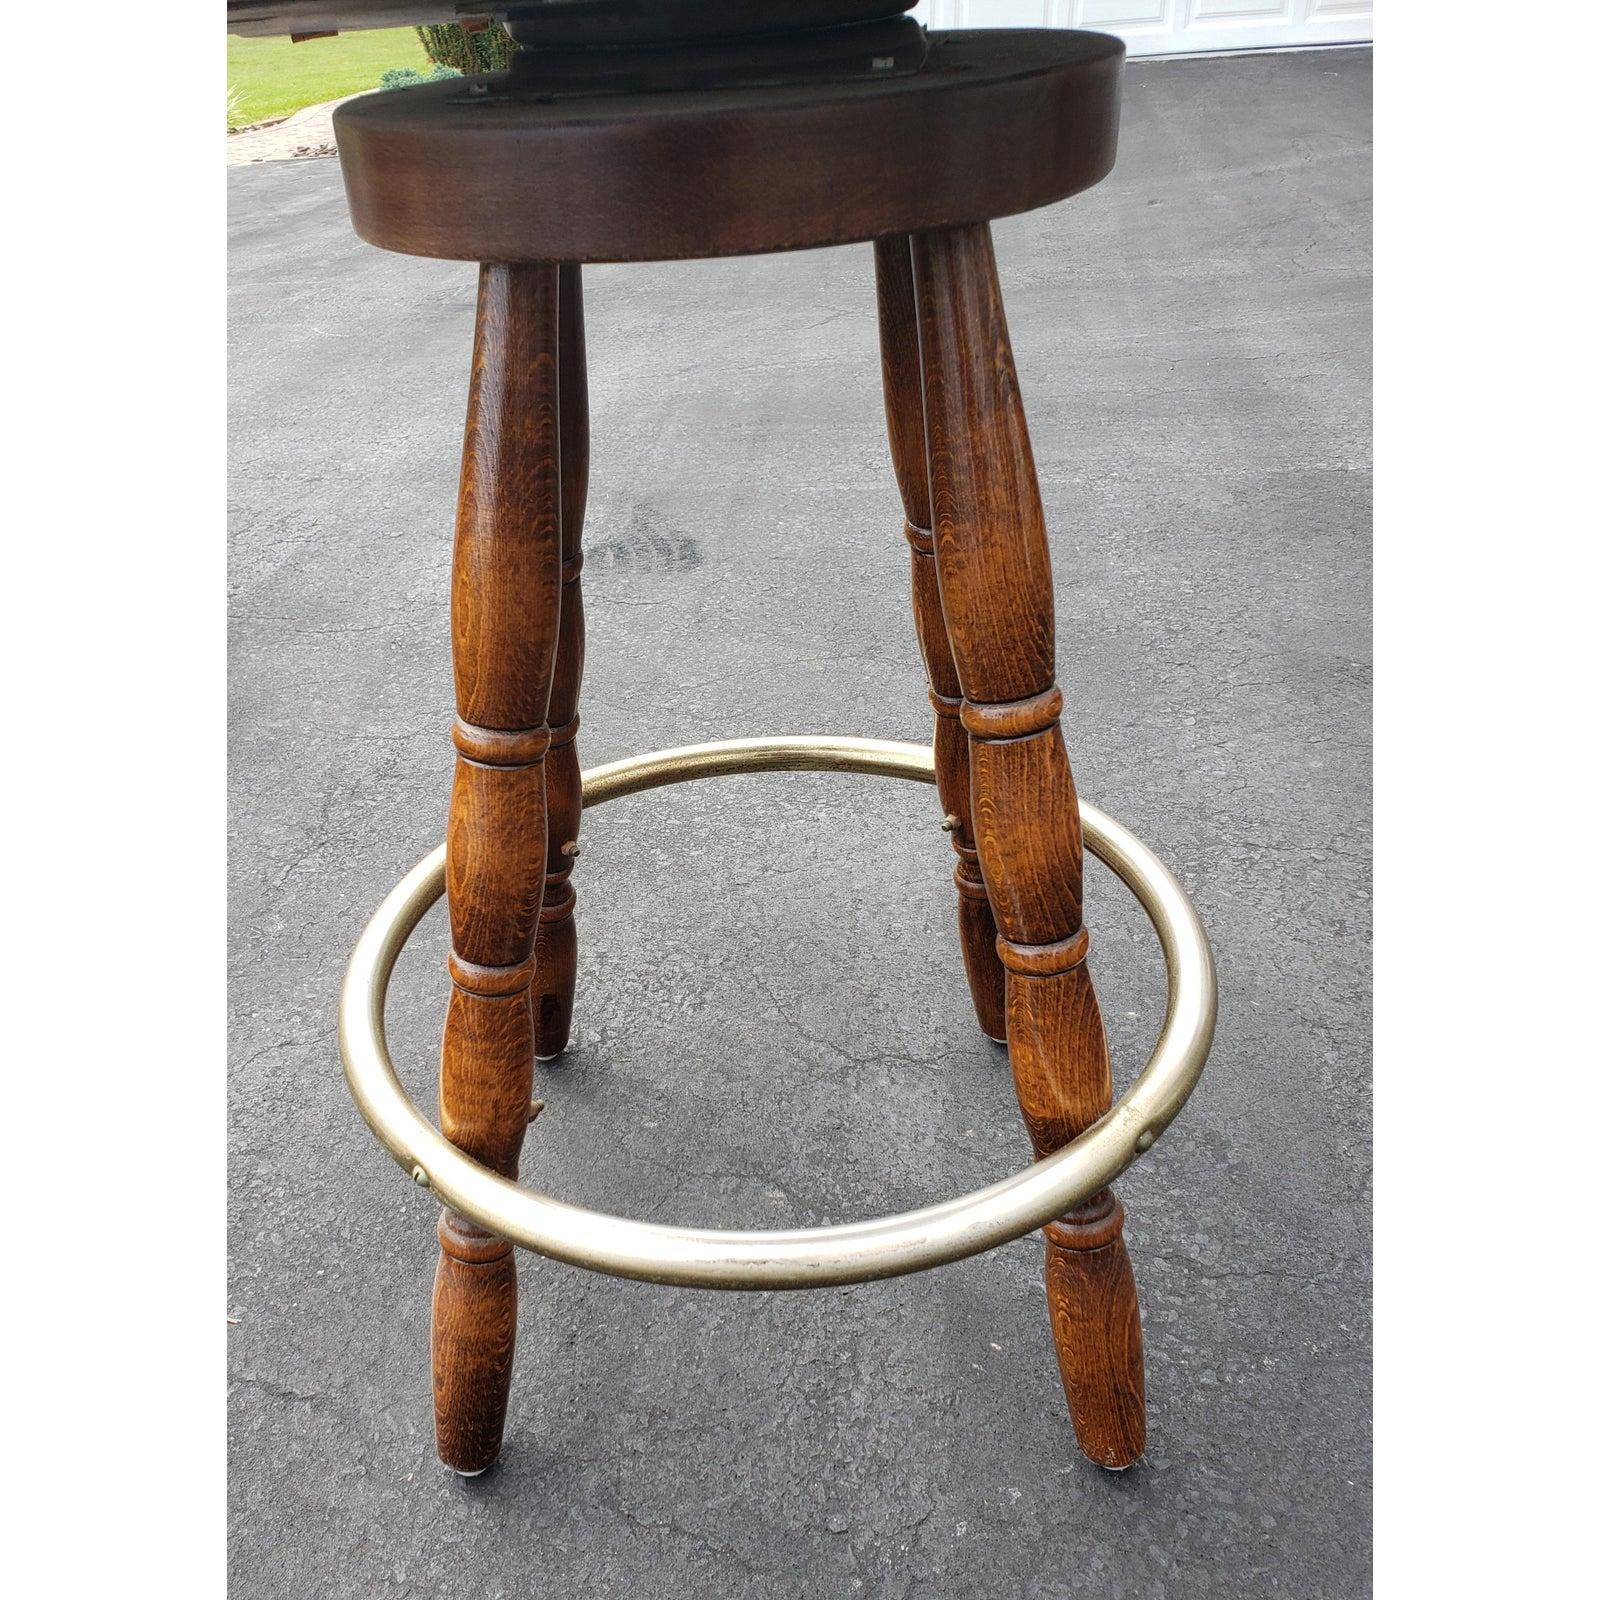 American Colonial Vintage Windsor Swivel Spindle Turned Legs Bar Stools, a Pair For Sale